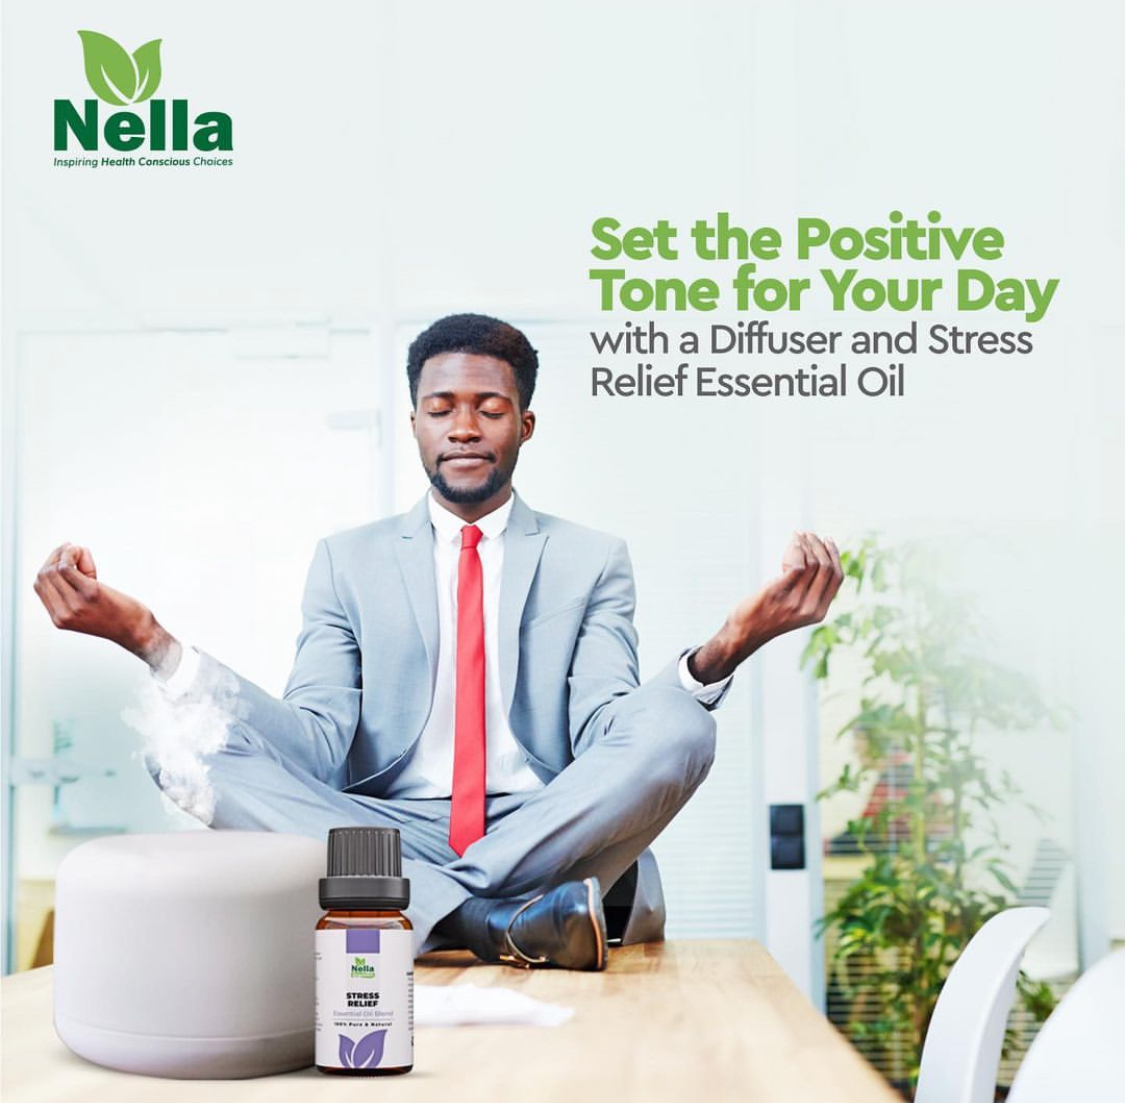 Infuse positivity into your day with aroma. Elevate your mood, banish stress, and seize the day with a tranquil spirit. 🌿☀️ #nellawellness #StressRelief